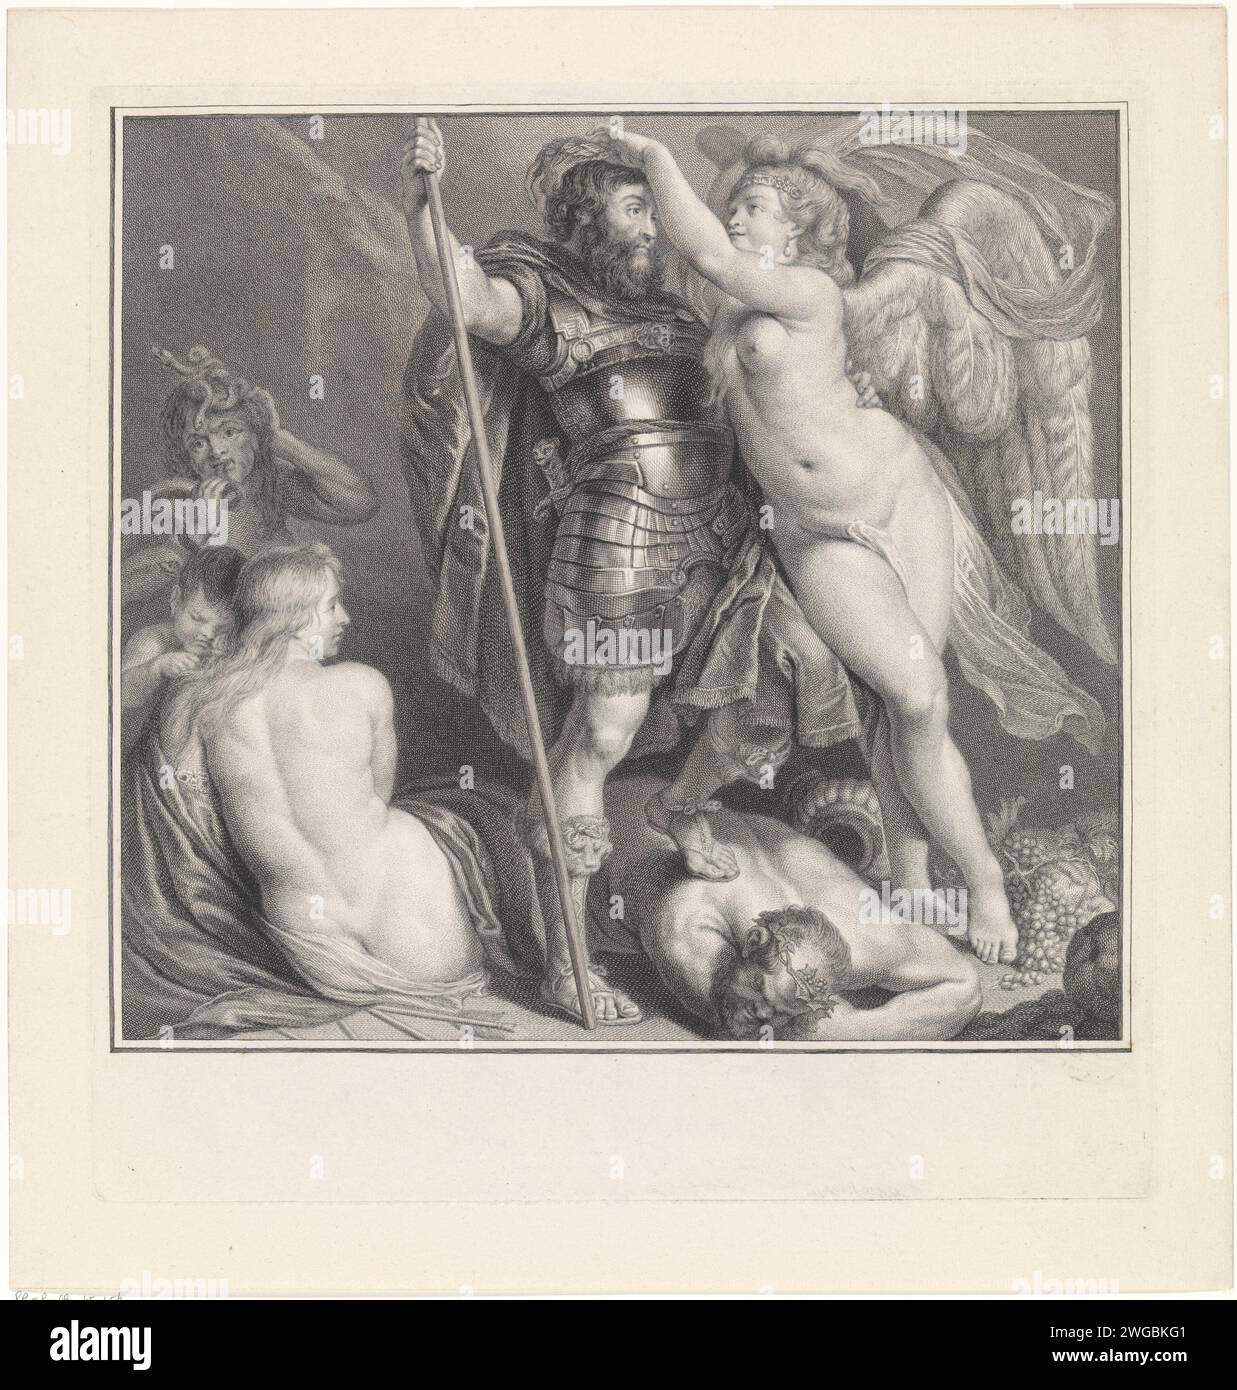 Victoria crowns a virtuous hero, Pieter Tanjé, after Peter Paul Rubens, after Charles François Hutin, 1716 - 1761 print The goddess of victory, Victoria, puts a laurel wreath on the head of a virtuous Gaharnaste hero. The hero has overcome drinks, pleasure and envy. He stands with his foot on Bacchus, the god of the wine. Behind him are the grieving Venus and Amor and stands the envy. Amsterdam paper engraving / etching 'Victoria'; 'Vittoria', 'Naval victory', 'Victory of antiqui' (Ripa). Crowning with Laurel. (Story of) Bacchus (Dionysus), Liber. Venus and Cupid (Cupid Not Being Mere Attribut Stock Photo